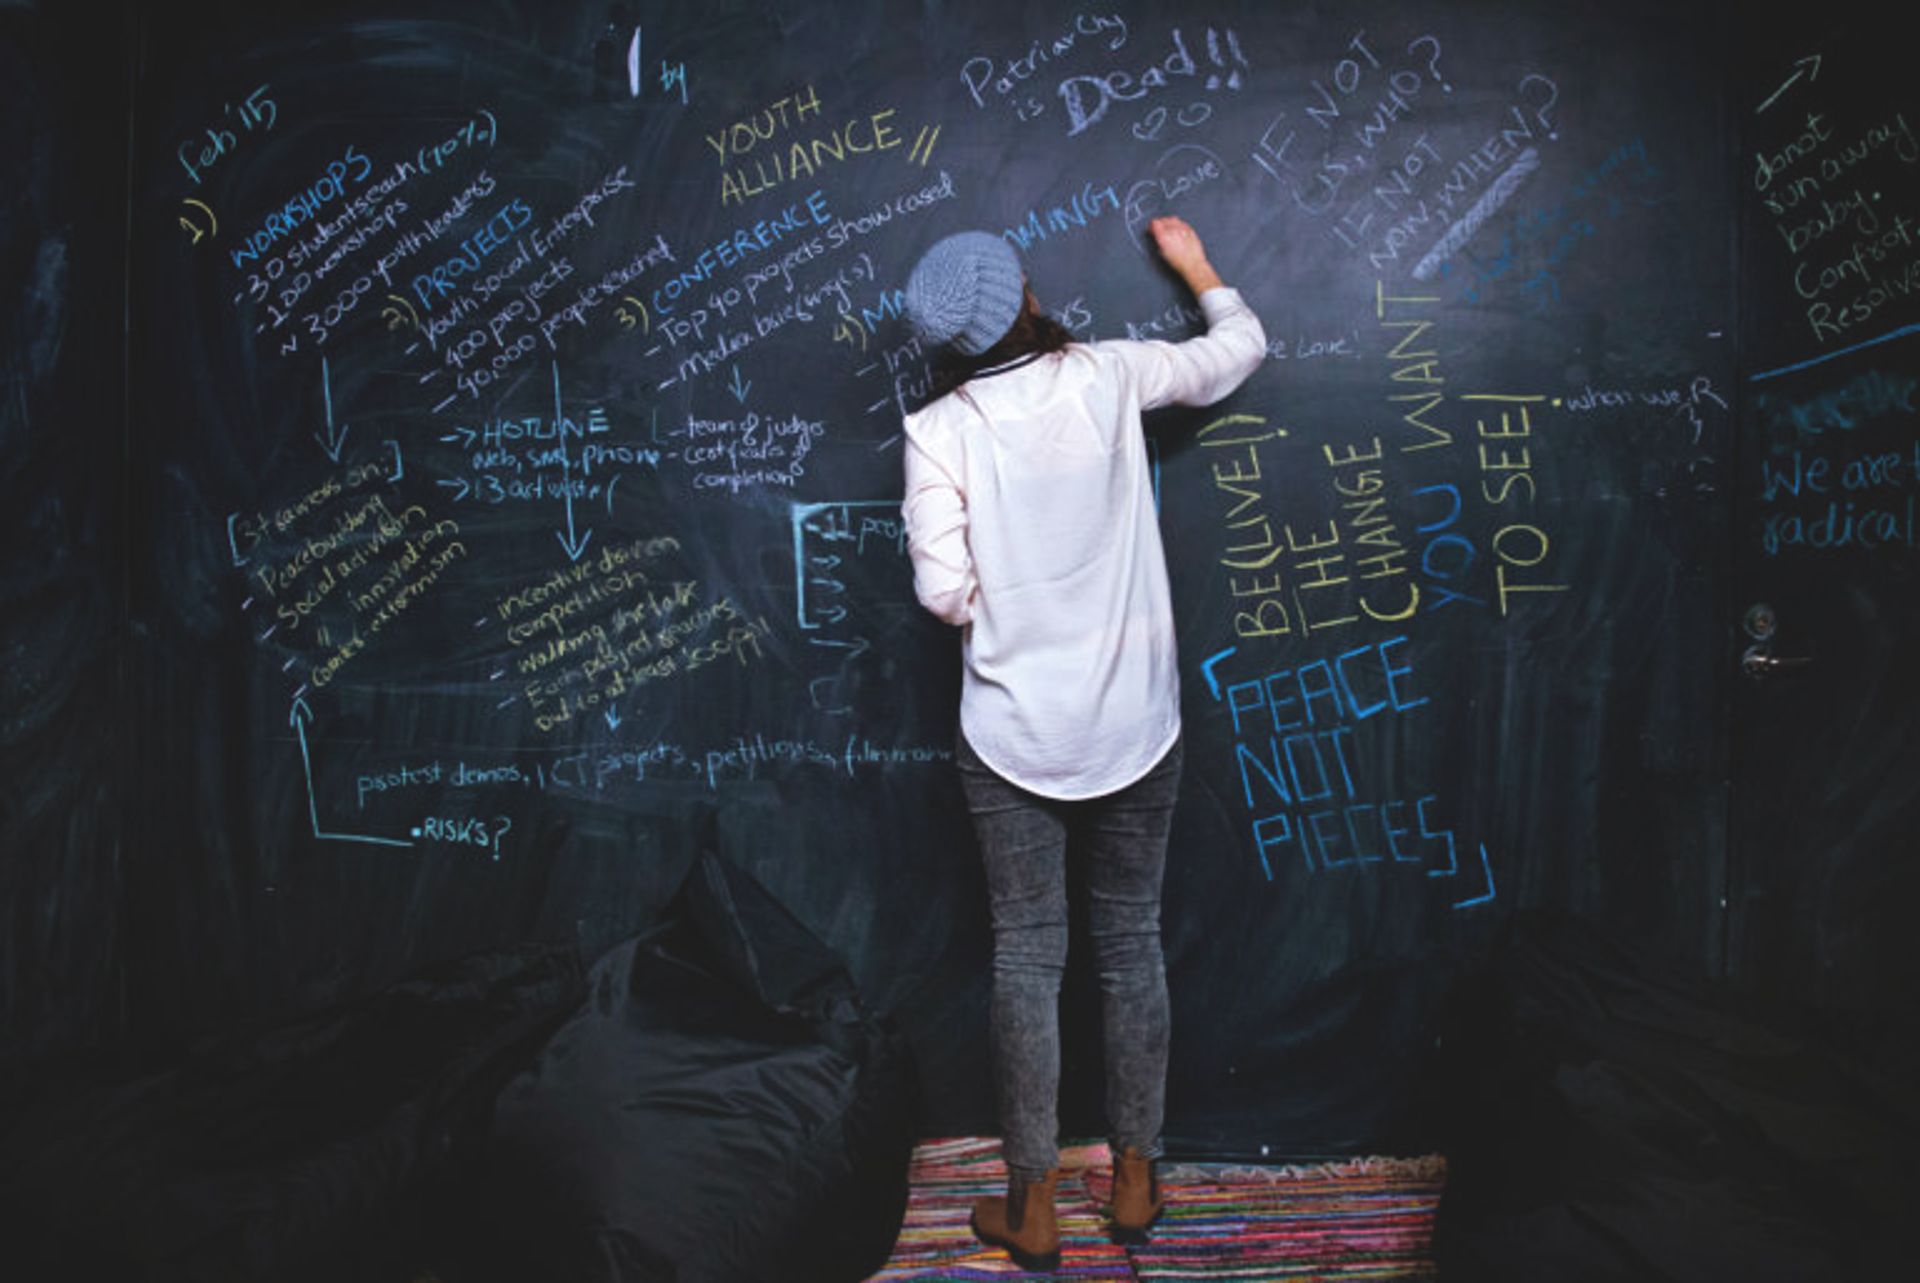 A person writing ideas on a large chalk wall.